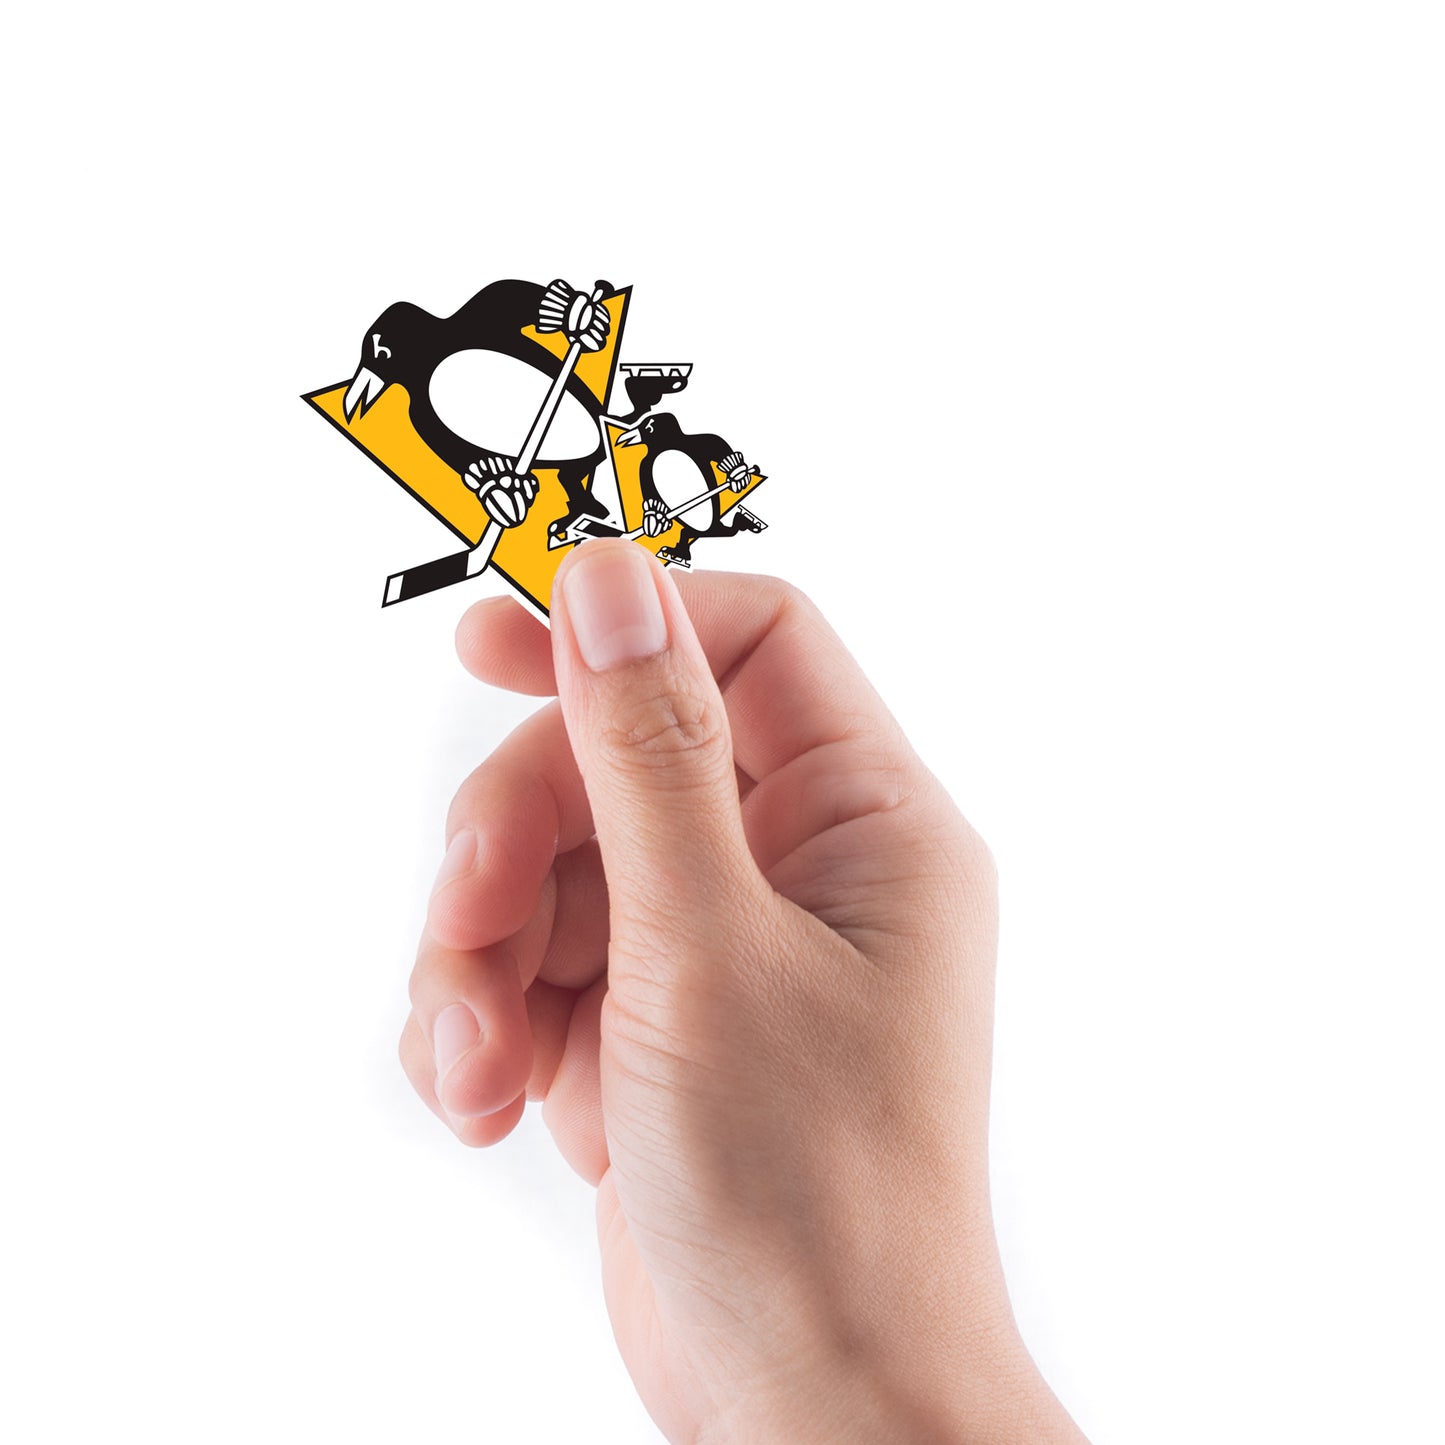 Sheet of 5 -Pittsburgh Penguins:   Logo Minis        - Officially Licensed NHL Removable    Adhesive Decal